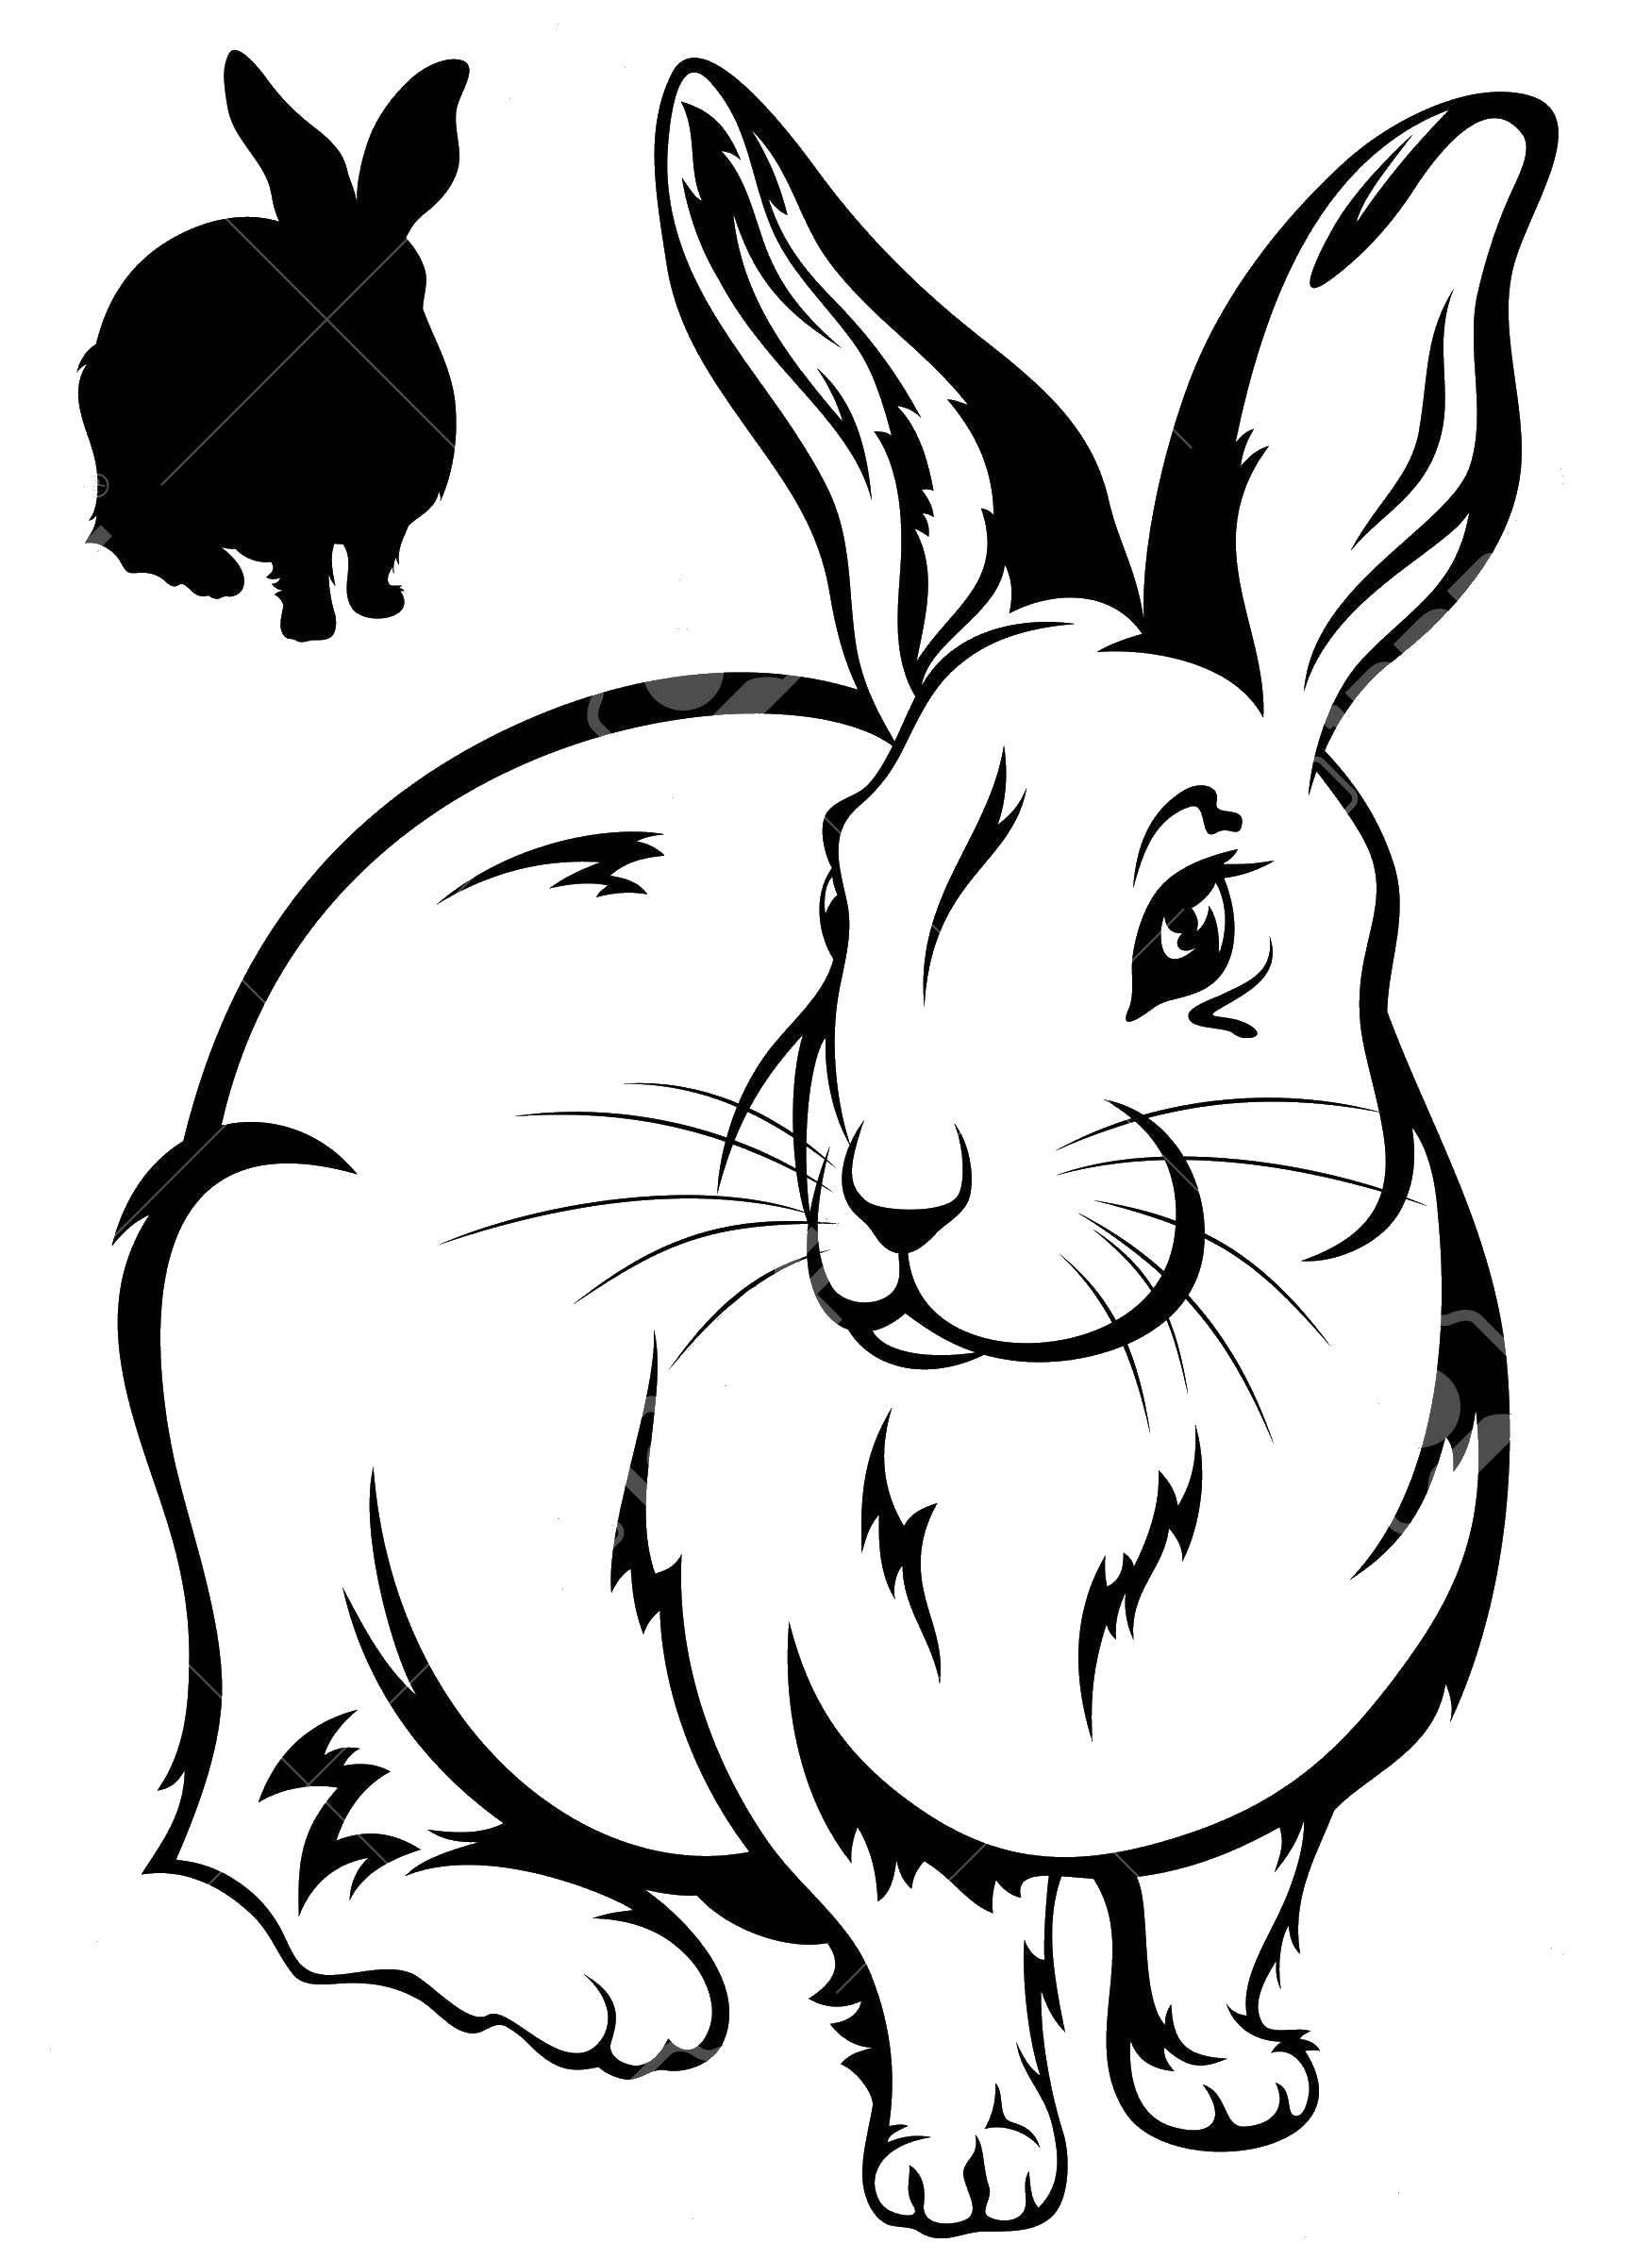 Coloring Cut rabbit. Category The contour of the hare to cut. Tags:  Animals, rabbit.